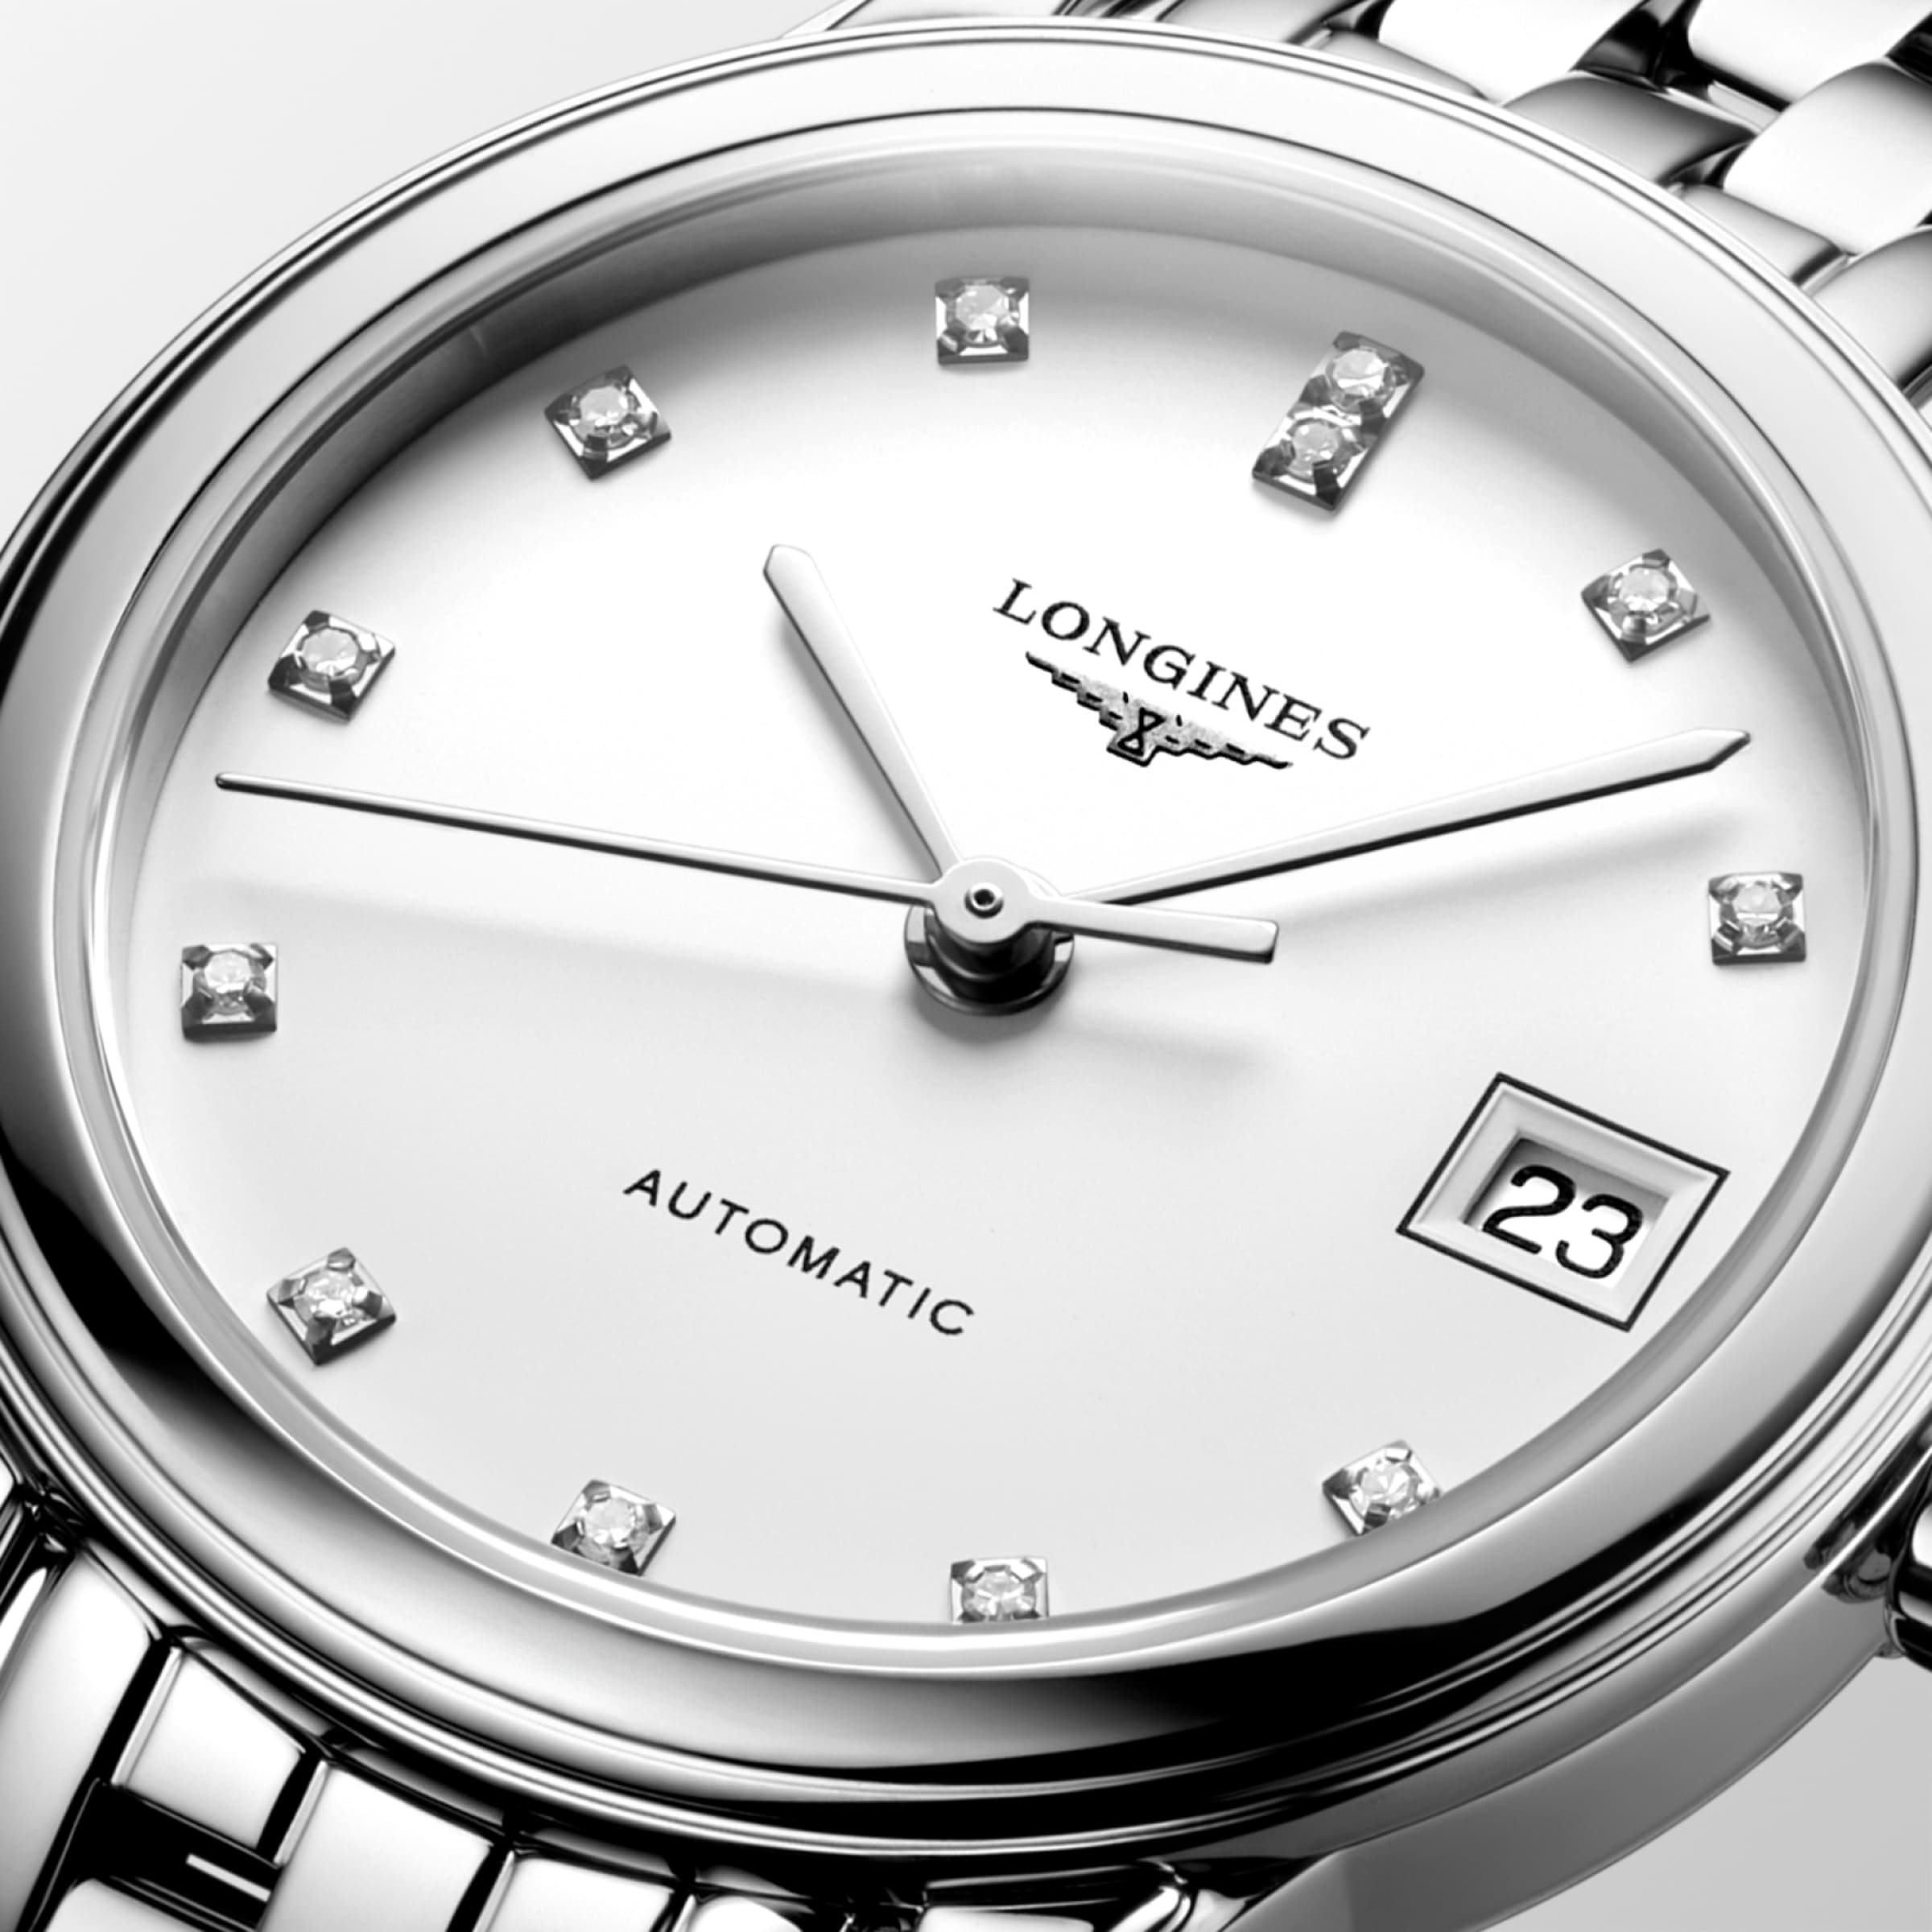 Longines FLAGSHIP Automatic Stainless steel Watch - L4.274.4.27.6